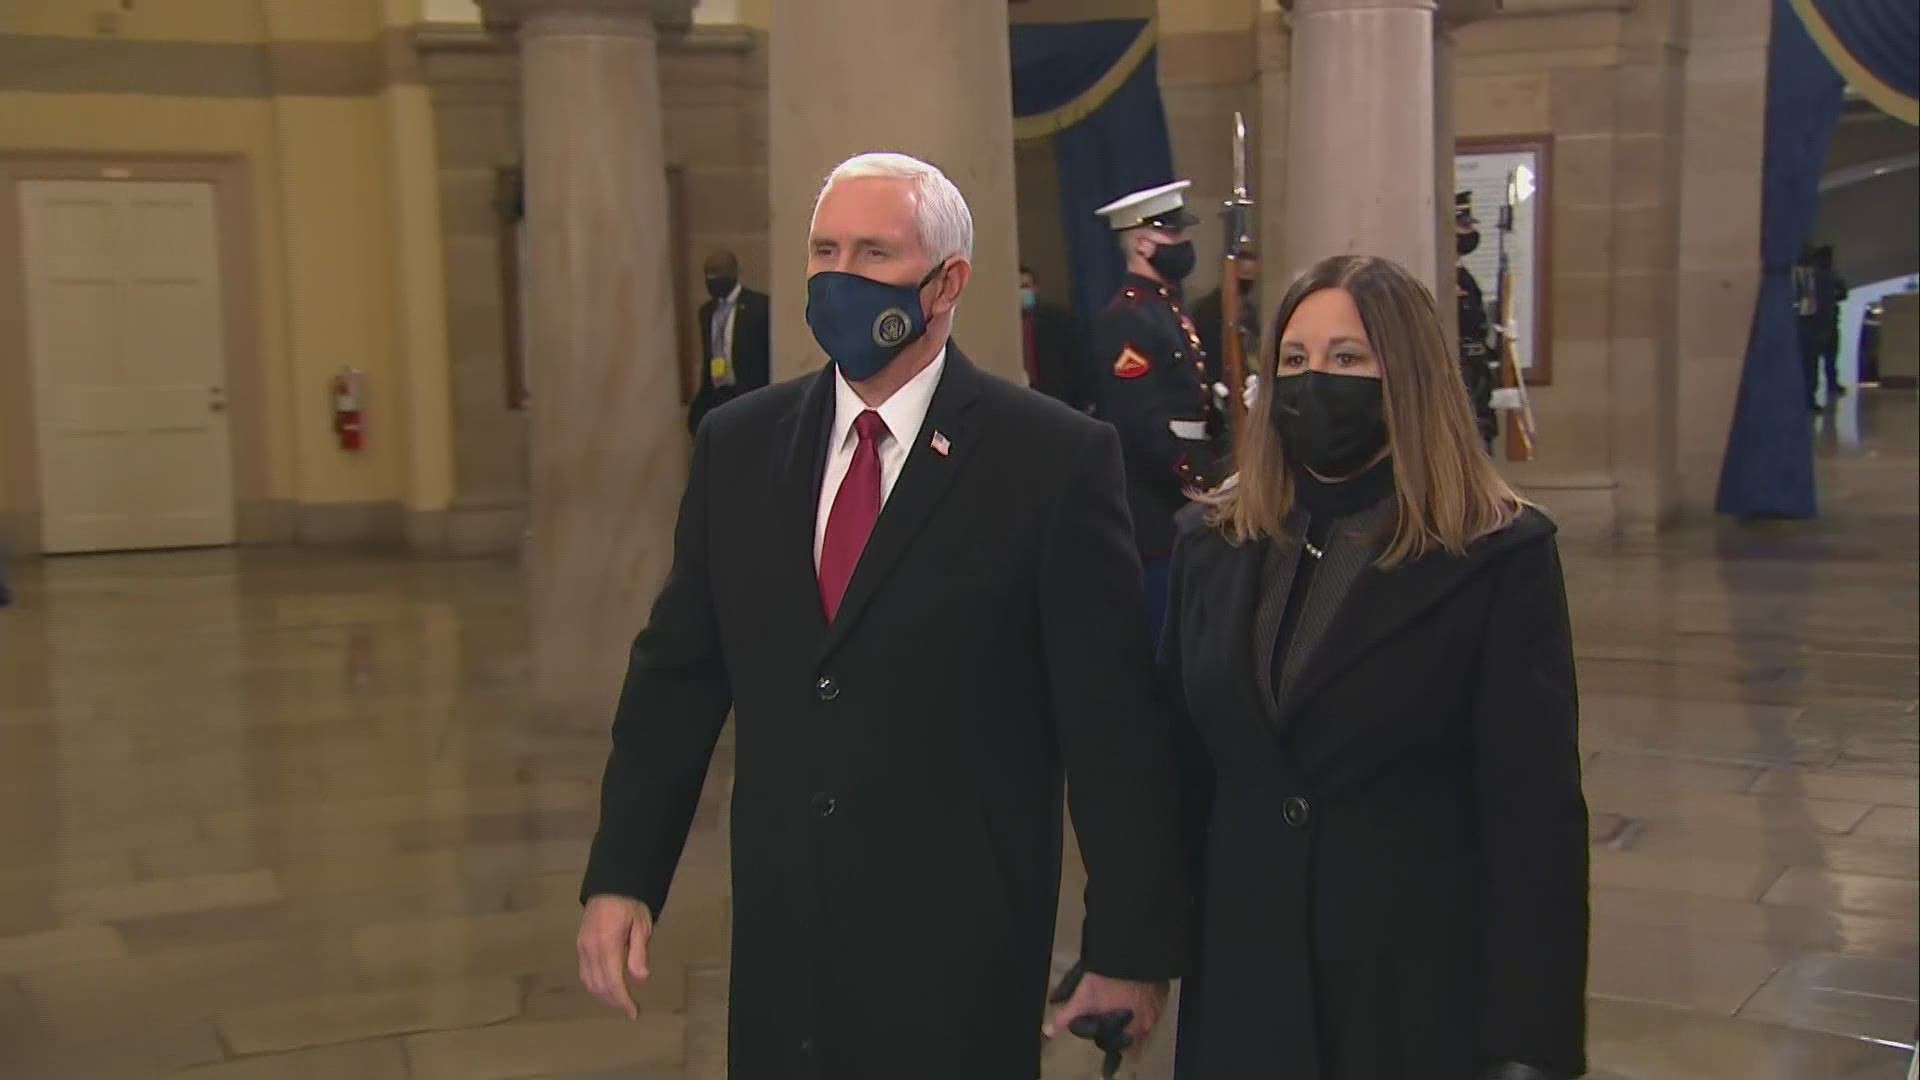 Mike and Karen Pence arrive at the Capitol for Joe Biden's inauguration.